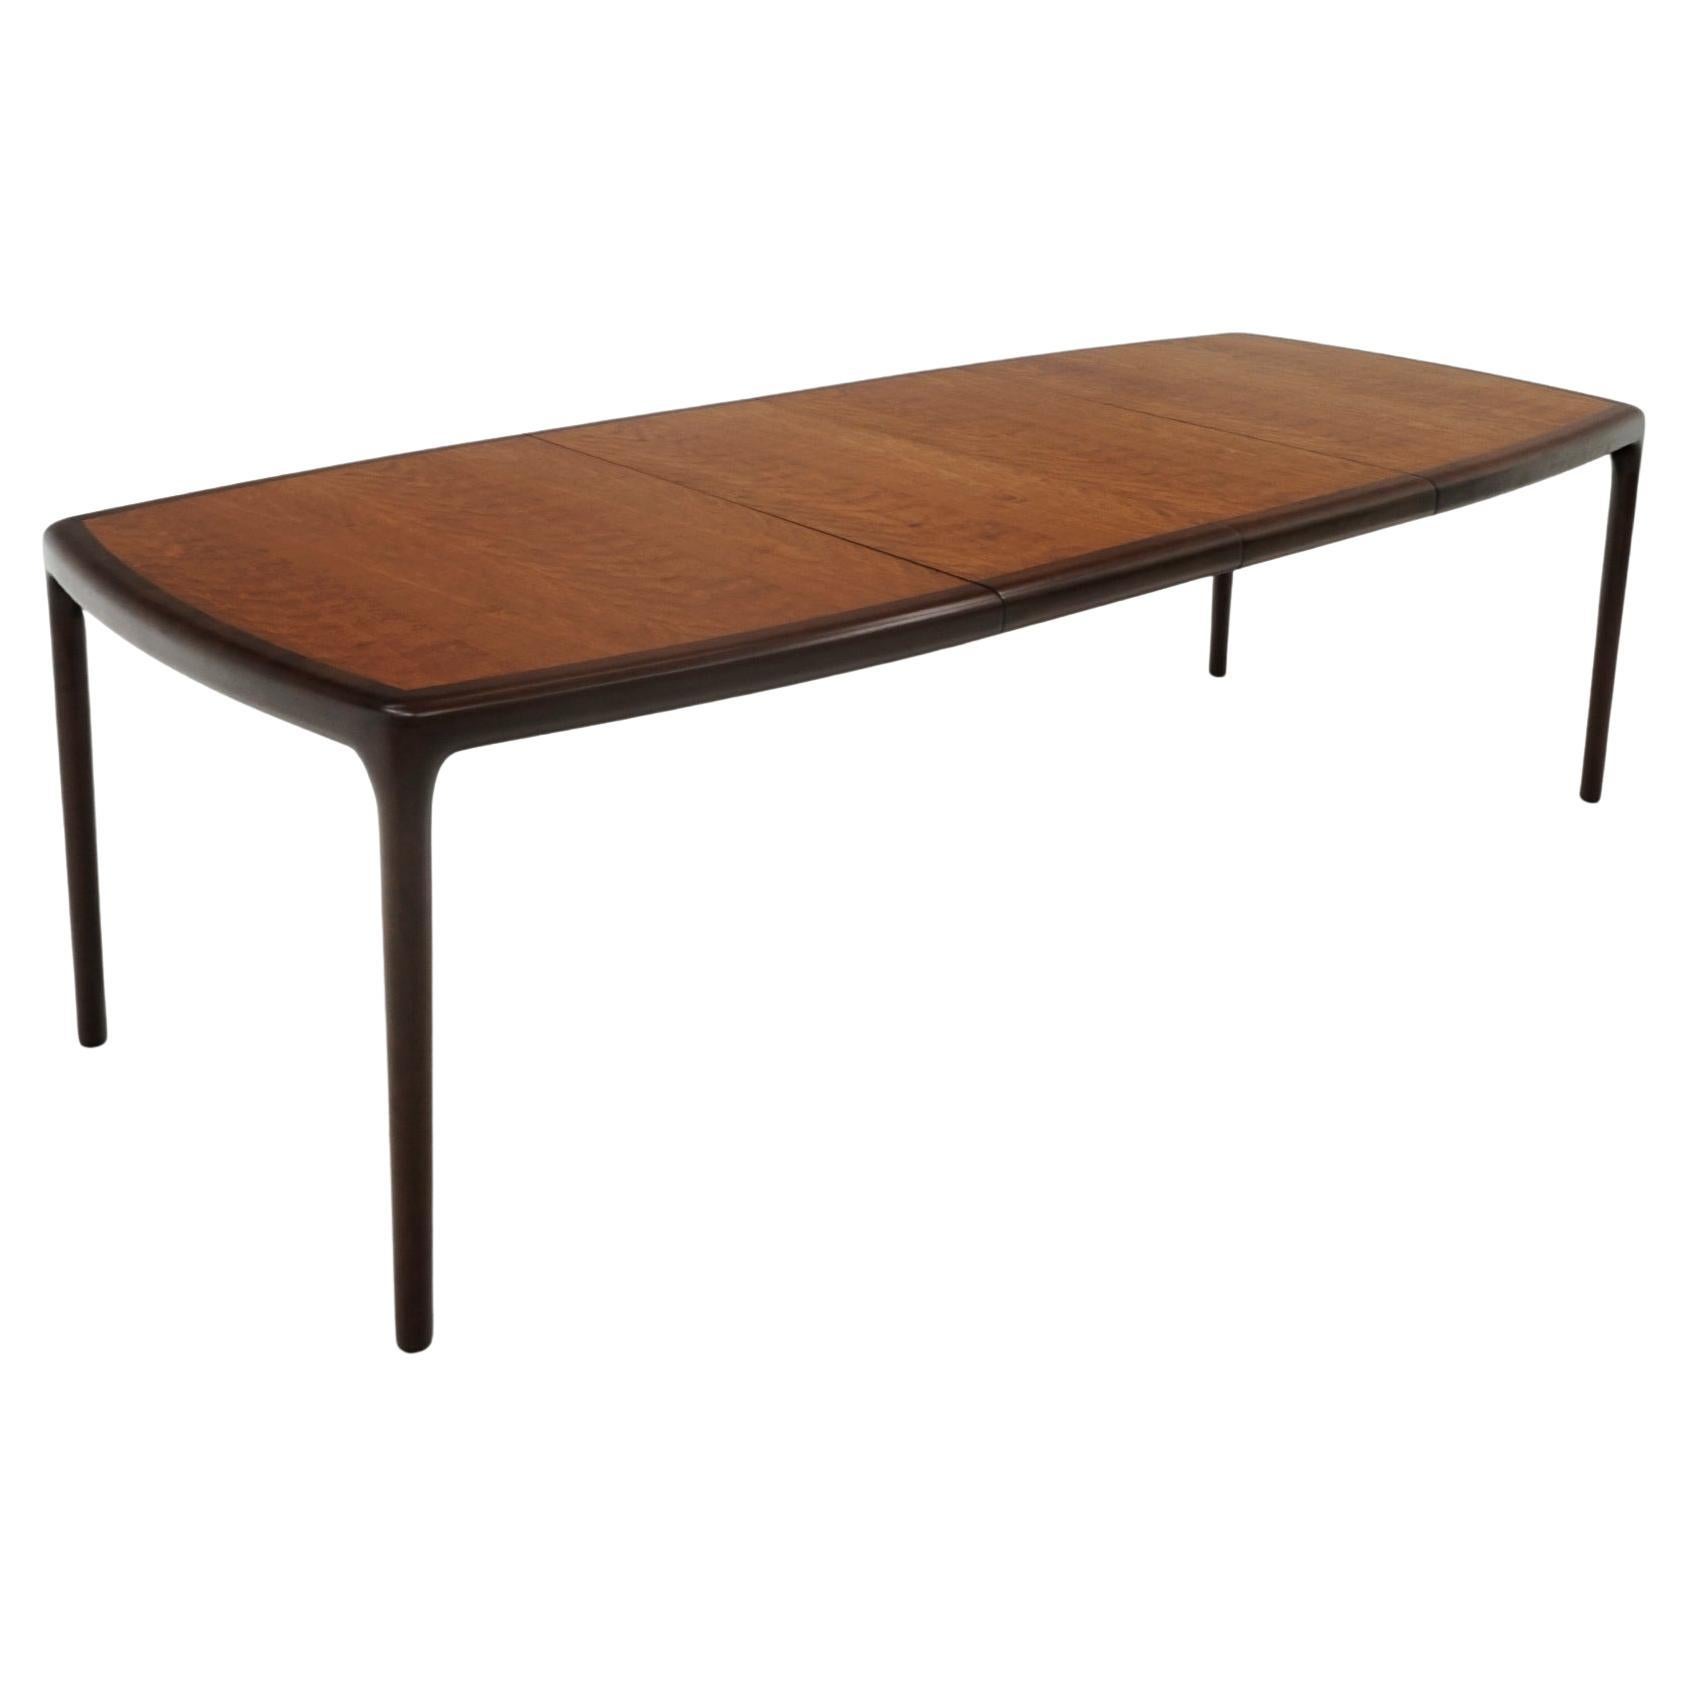 Dining Table in Cherry by Edward Wormley for Dunbar, Expertly Refinished